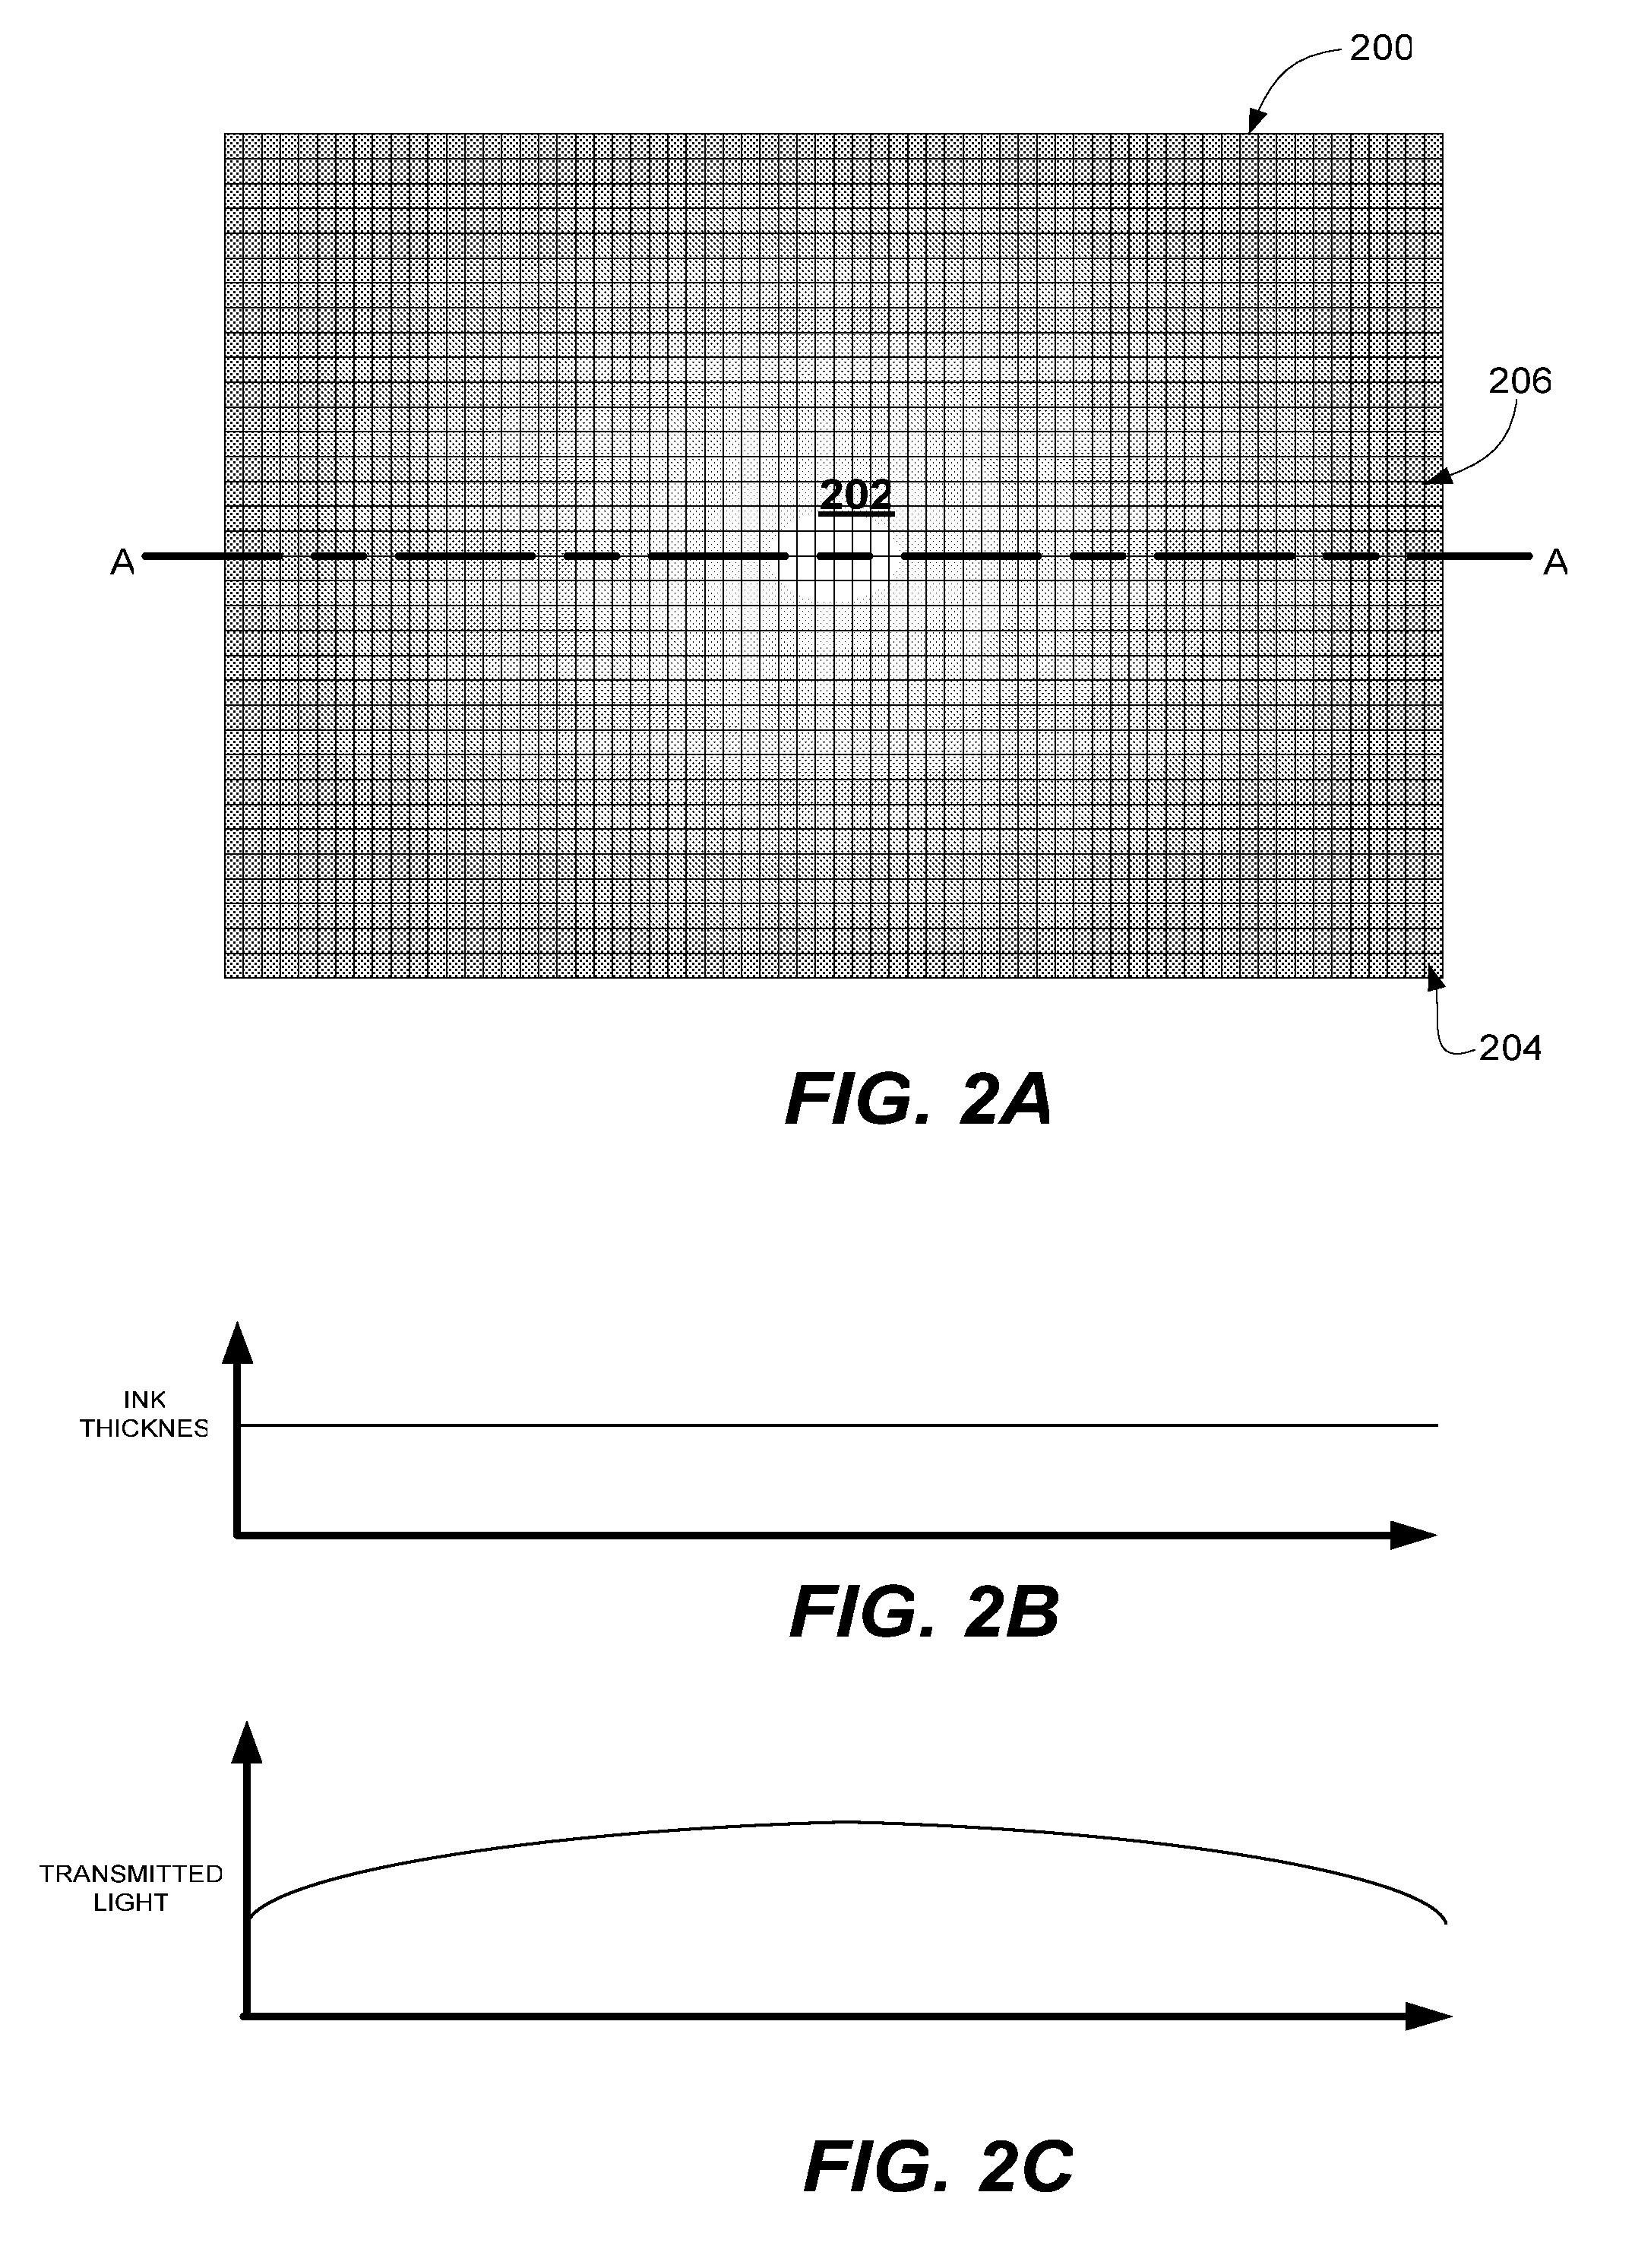 Methods and apparatus for balancing image brightness across a flat panel display using variable ink thickness